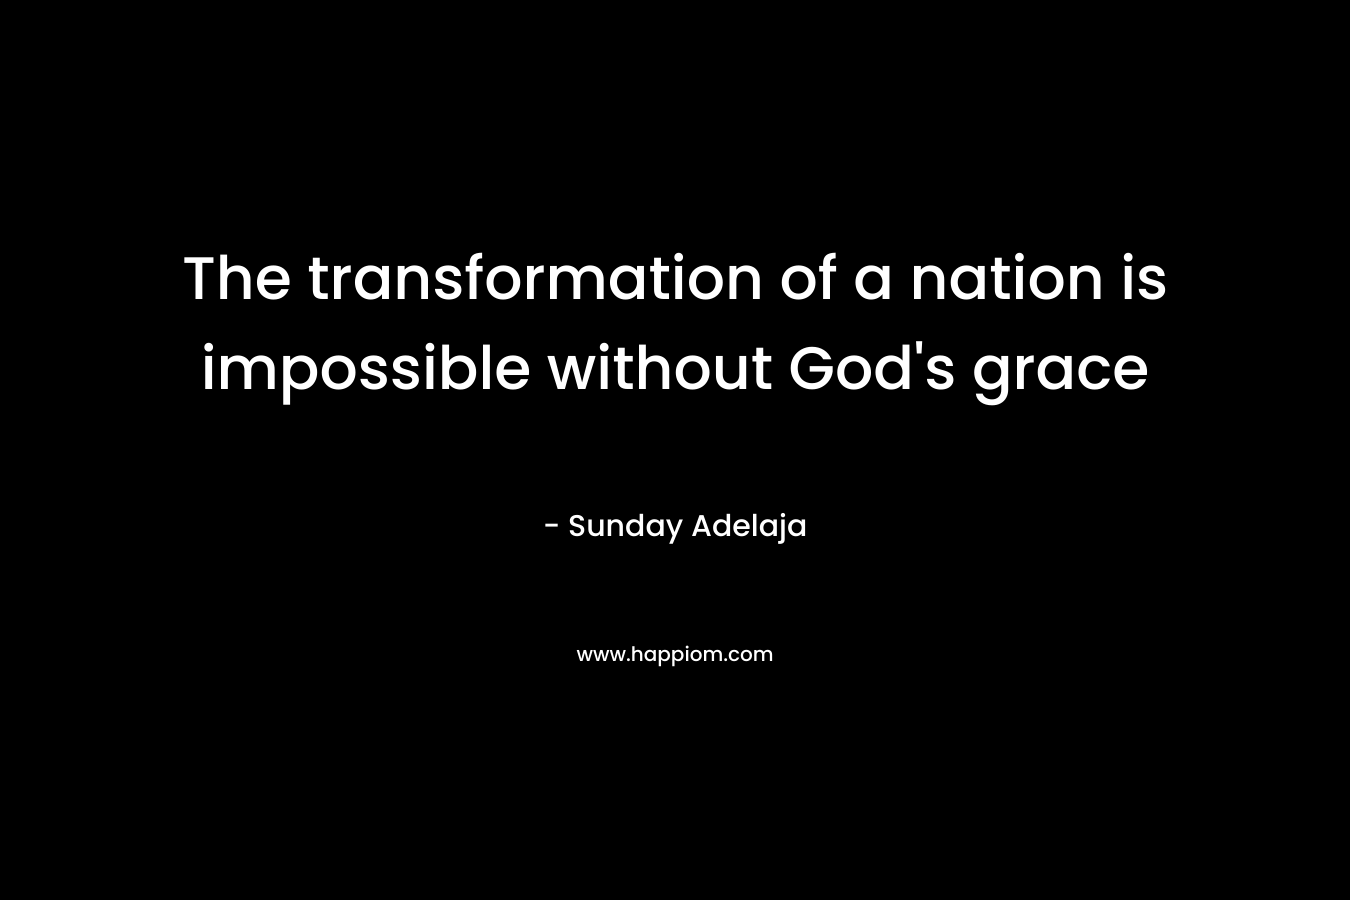 The transformation of a nation is impossible without God's grace